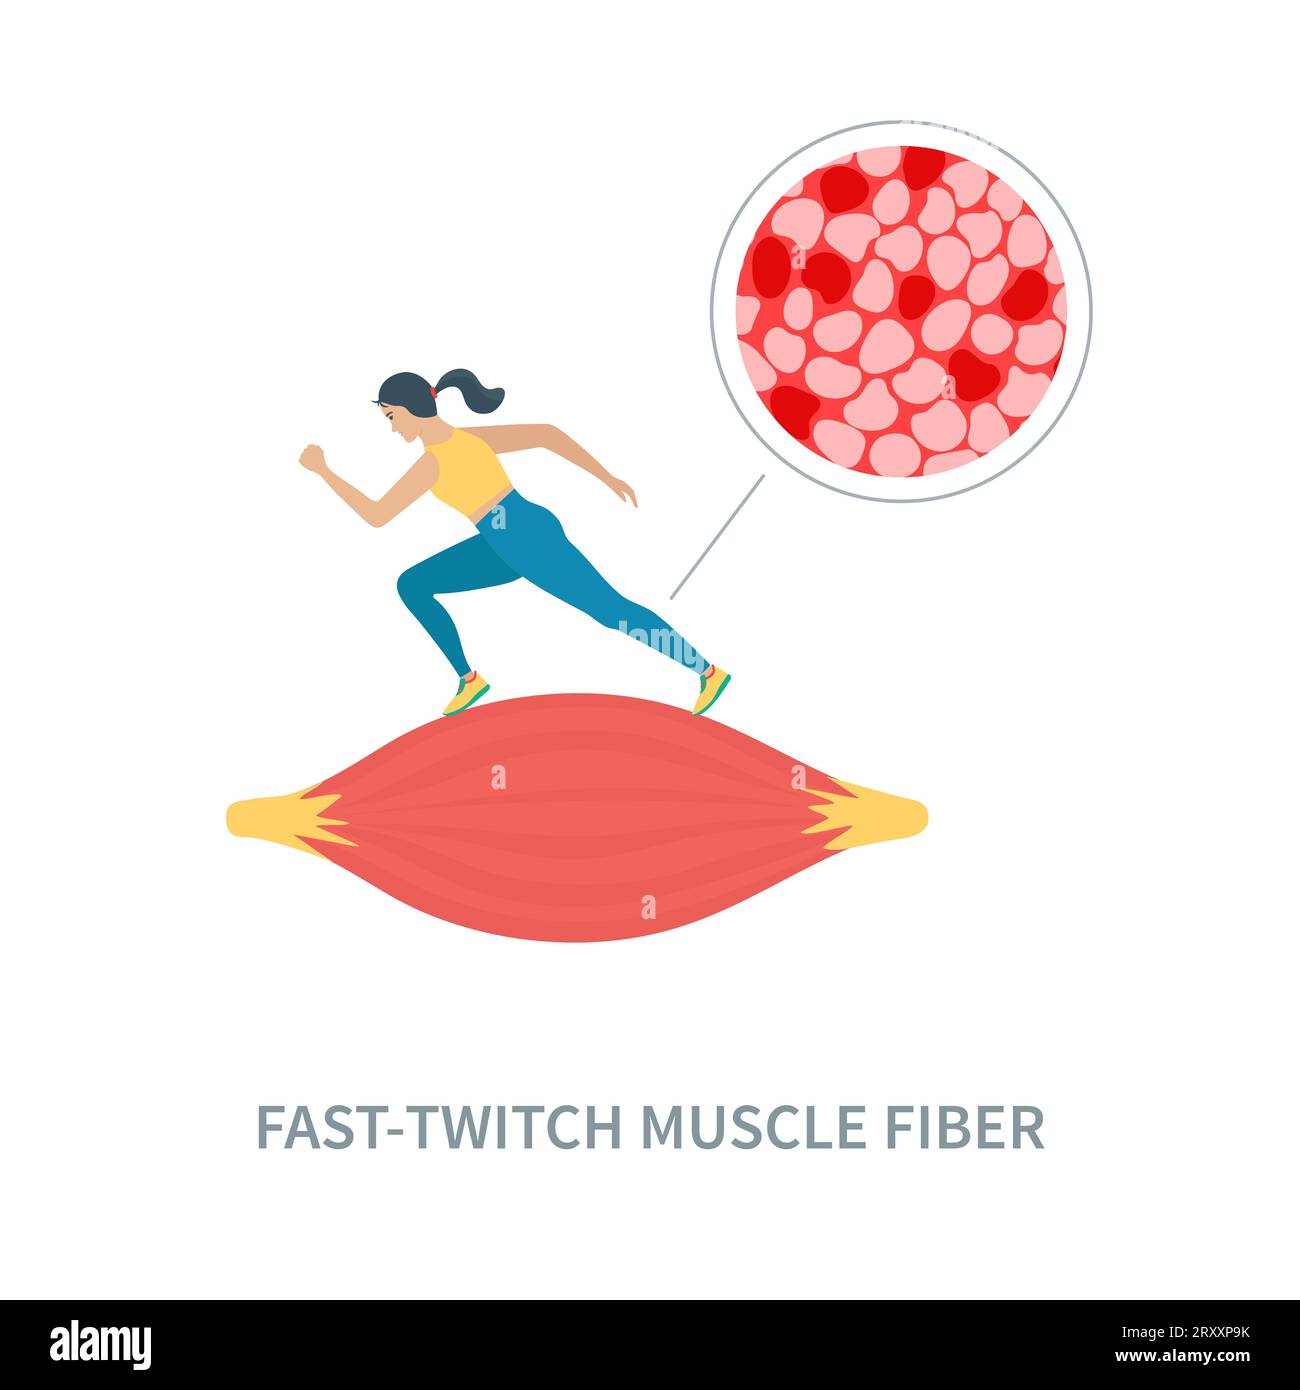 Fast twitch white muscle fiber type illustration Stock Vector